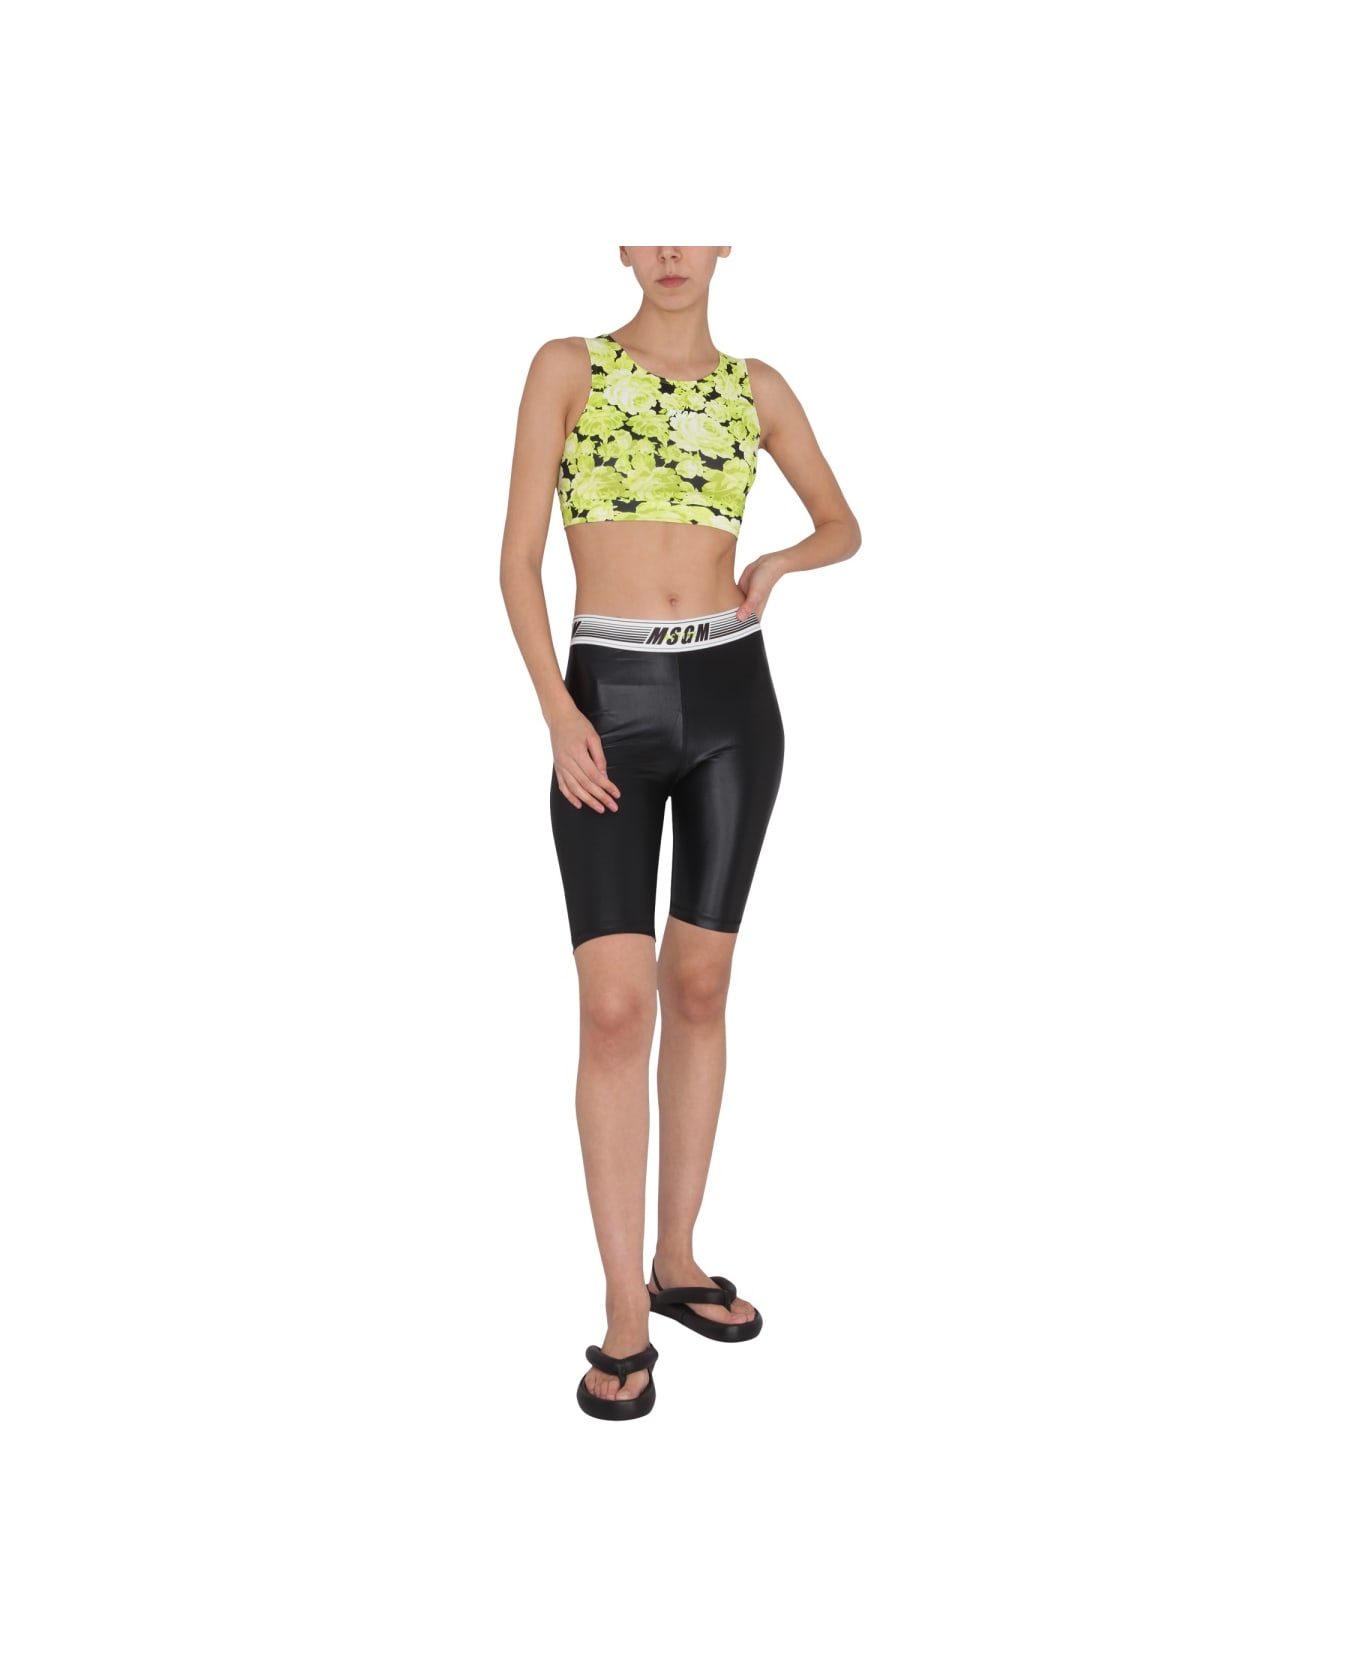 MSGM Floral Print Cropped Top - YELLOW